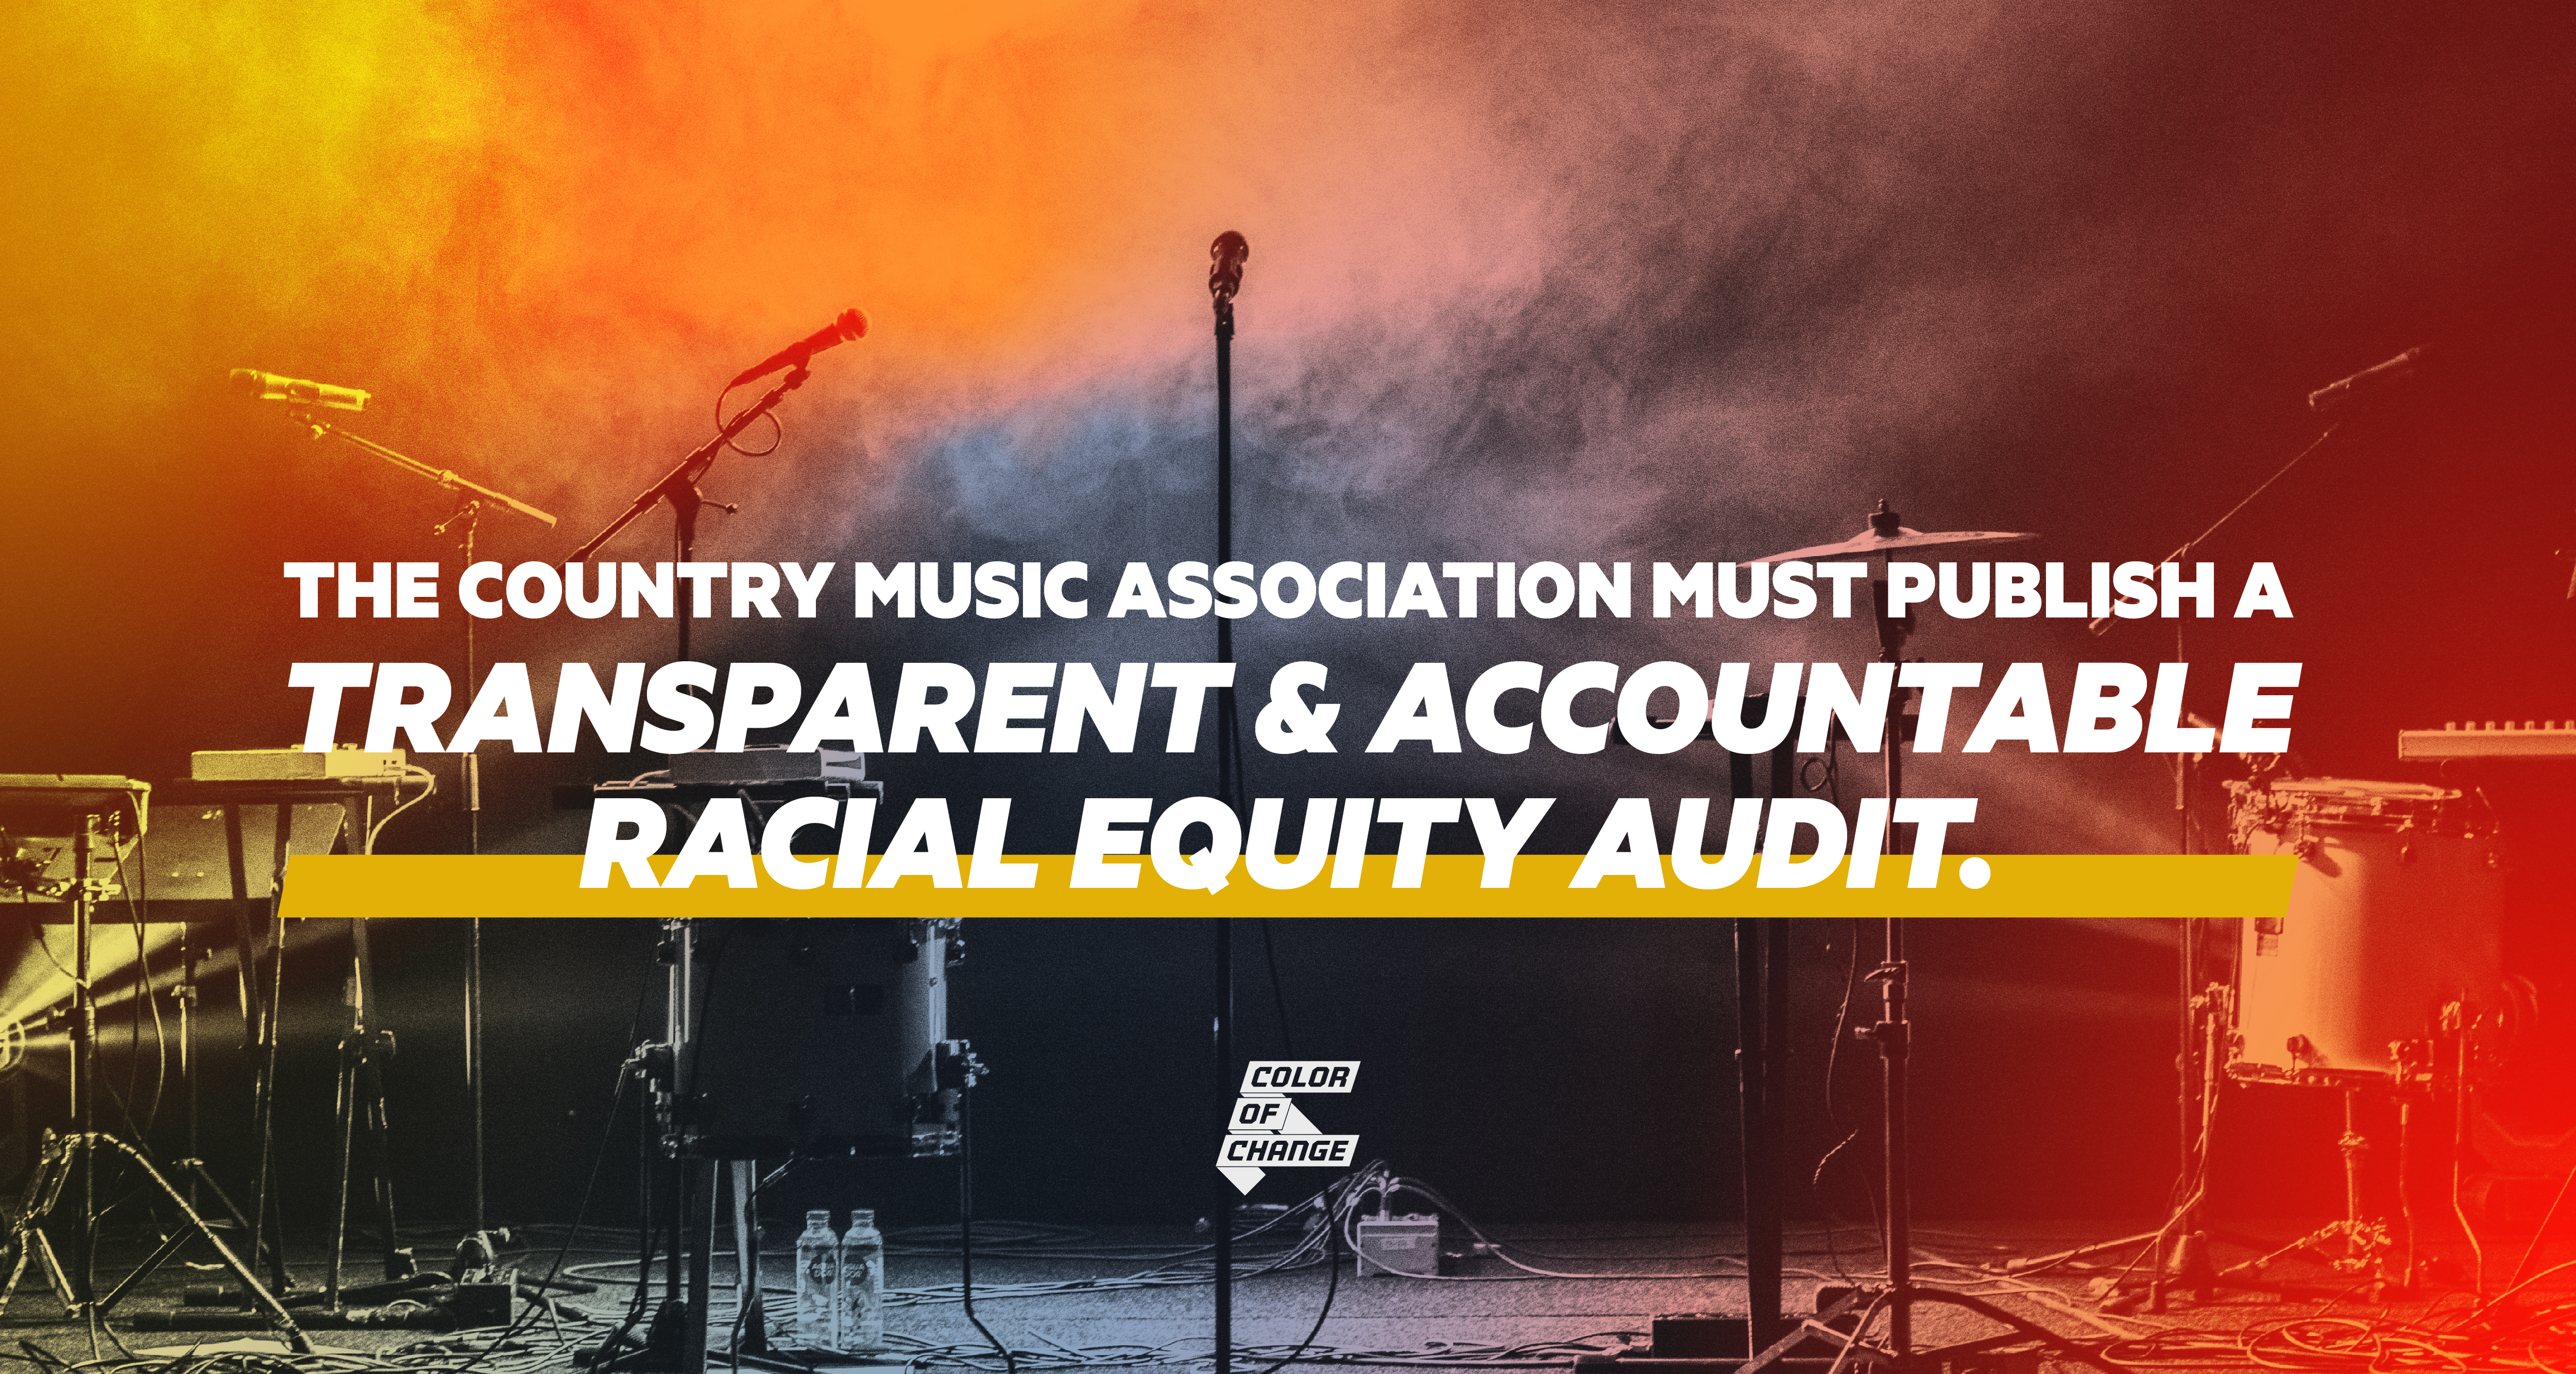 In the background is a black-and-white photo of a stage filled with country music instruments. It is layered with colors and smoke--yellows, oranges, and reds. Over top reads the campaign's call-to-action: 